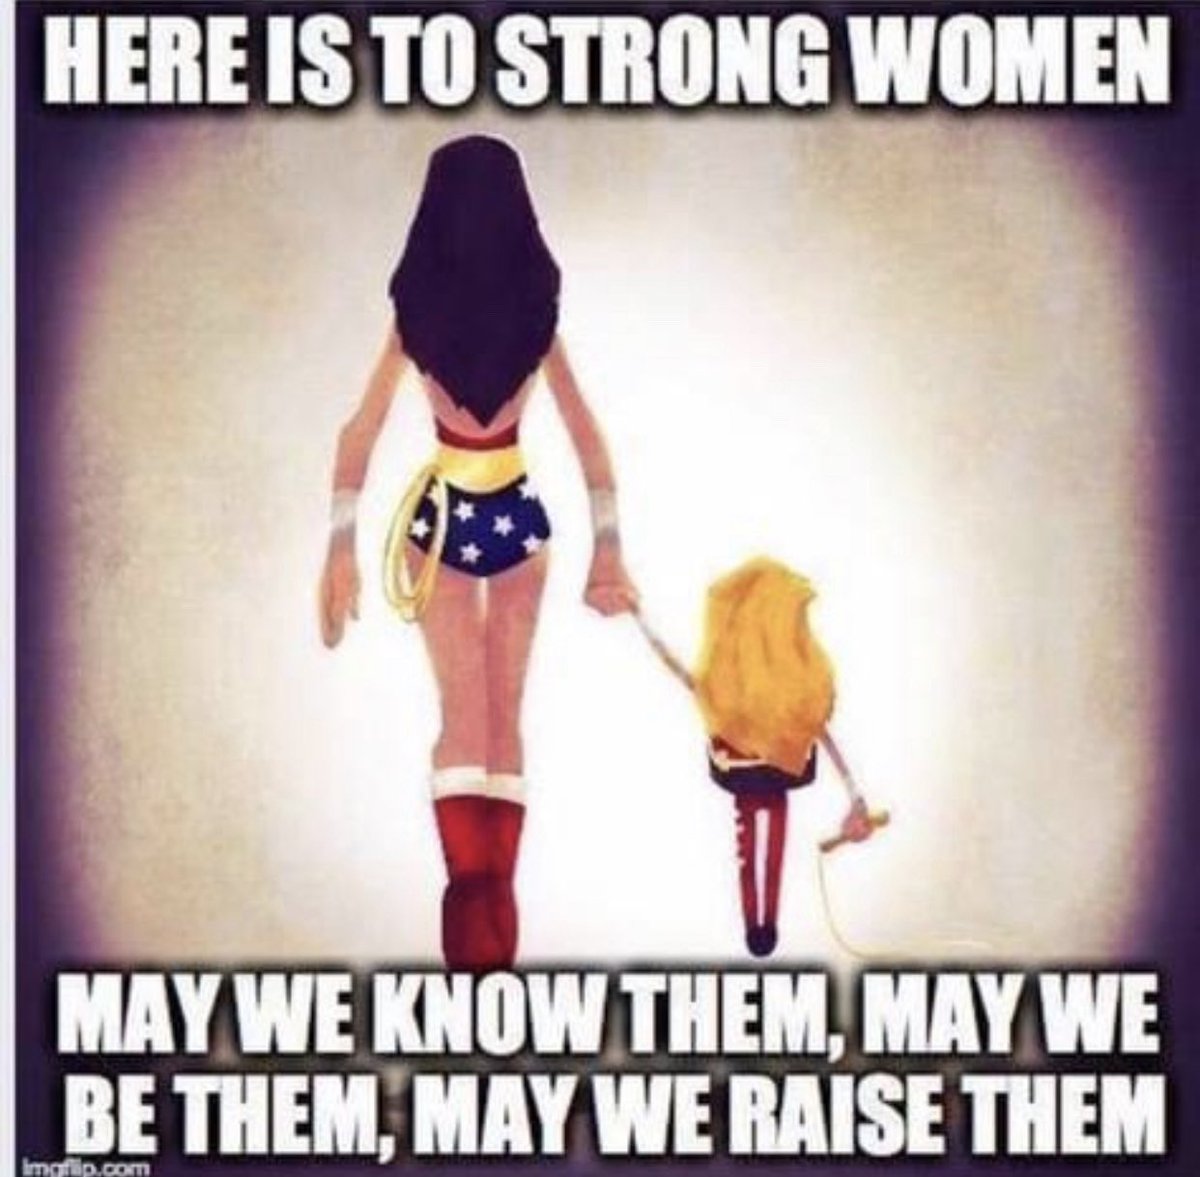 To all the moms who fight to heal their kids or fight to protect their kids…. Happy Mother’s Day. Remember you do it all and you do it with love. You are all CEOs of the household to train the next generation of women to stand strong and fight for our voices to be heard.